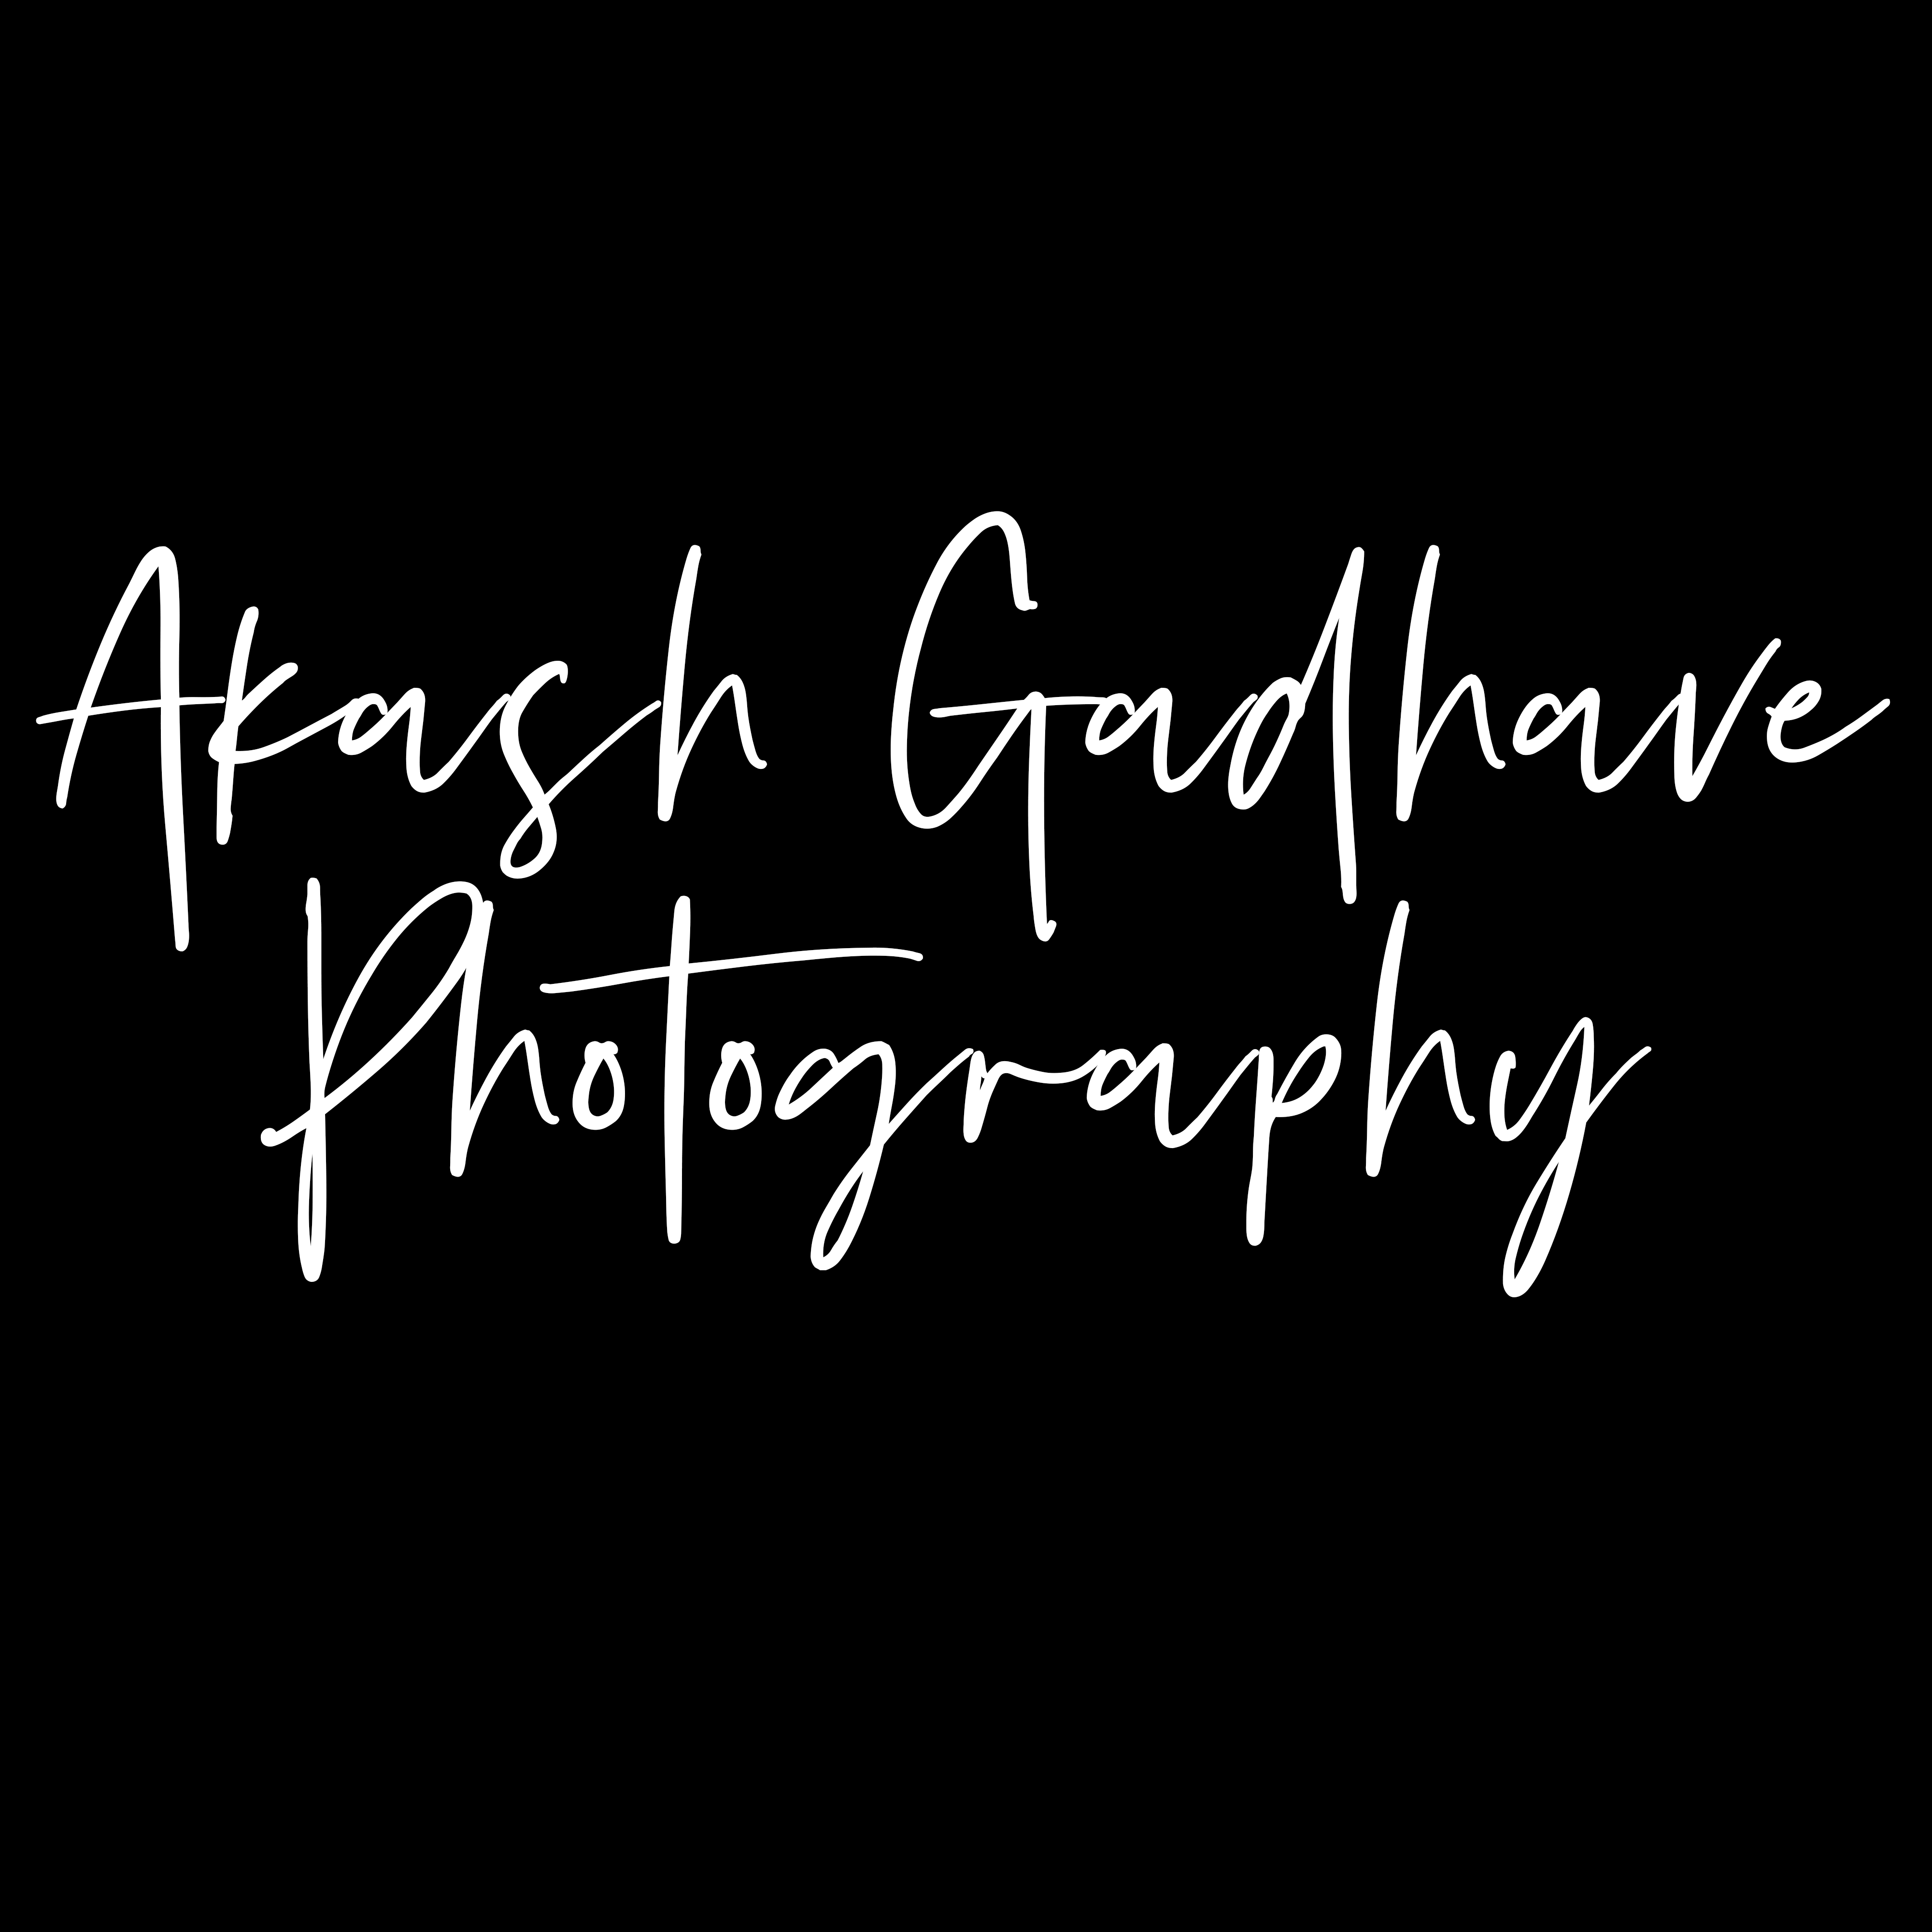 Akash Gadhave Photography|Banquet Halls|Event Services